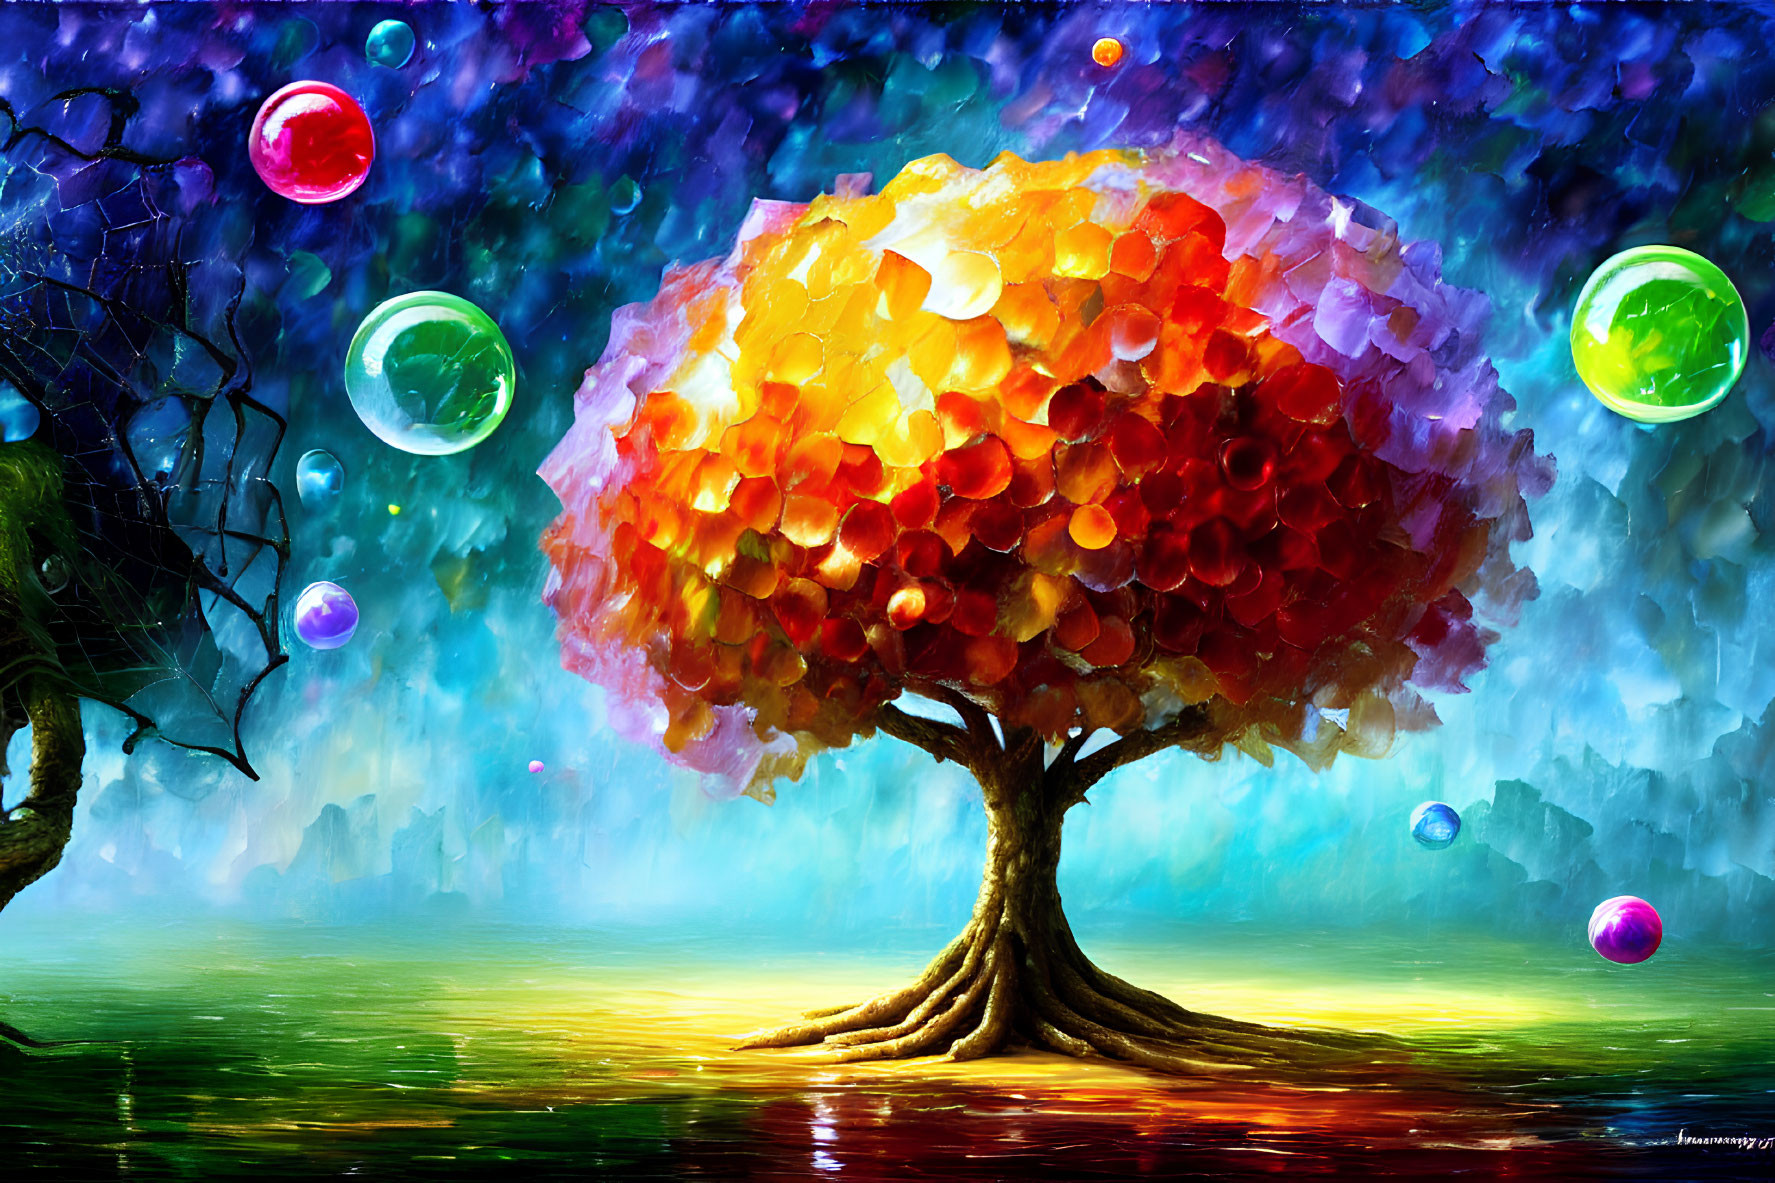 Colorful Fantasy Landscape with Vibrant Tree and Luminous Bubbles